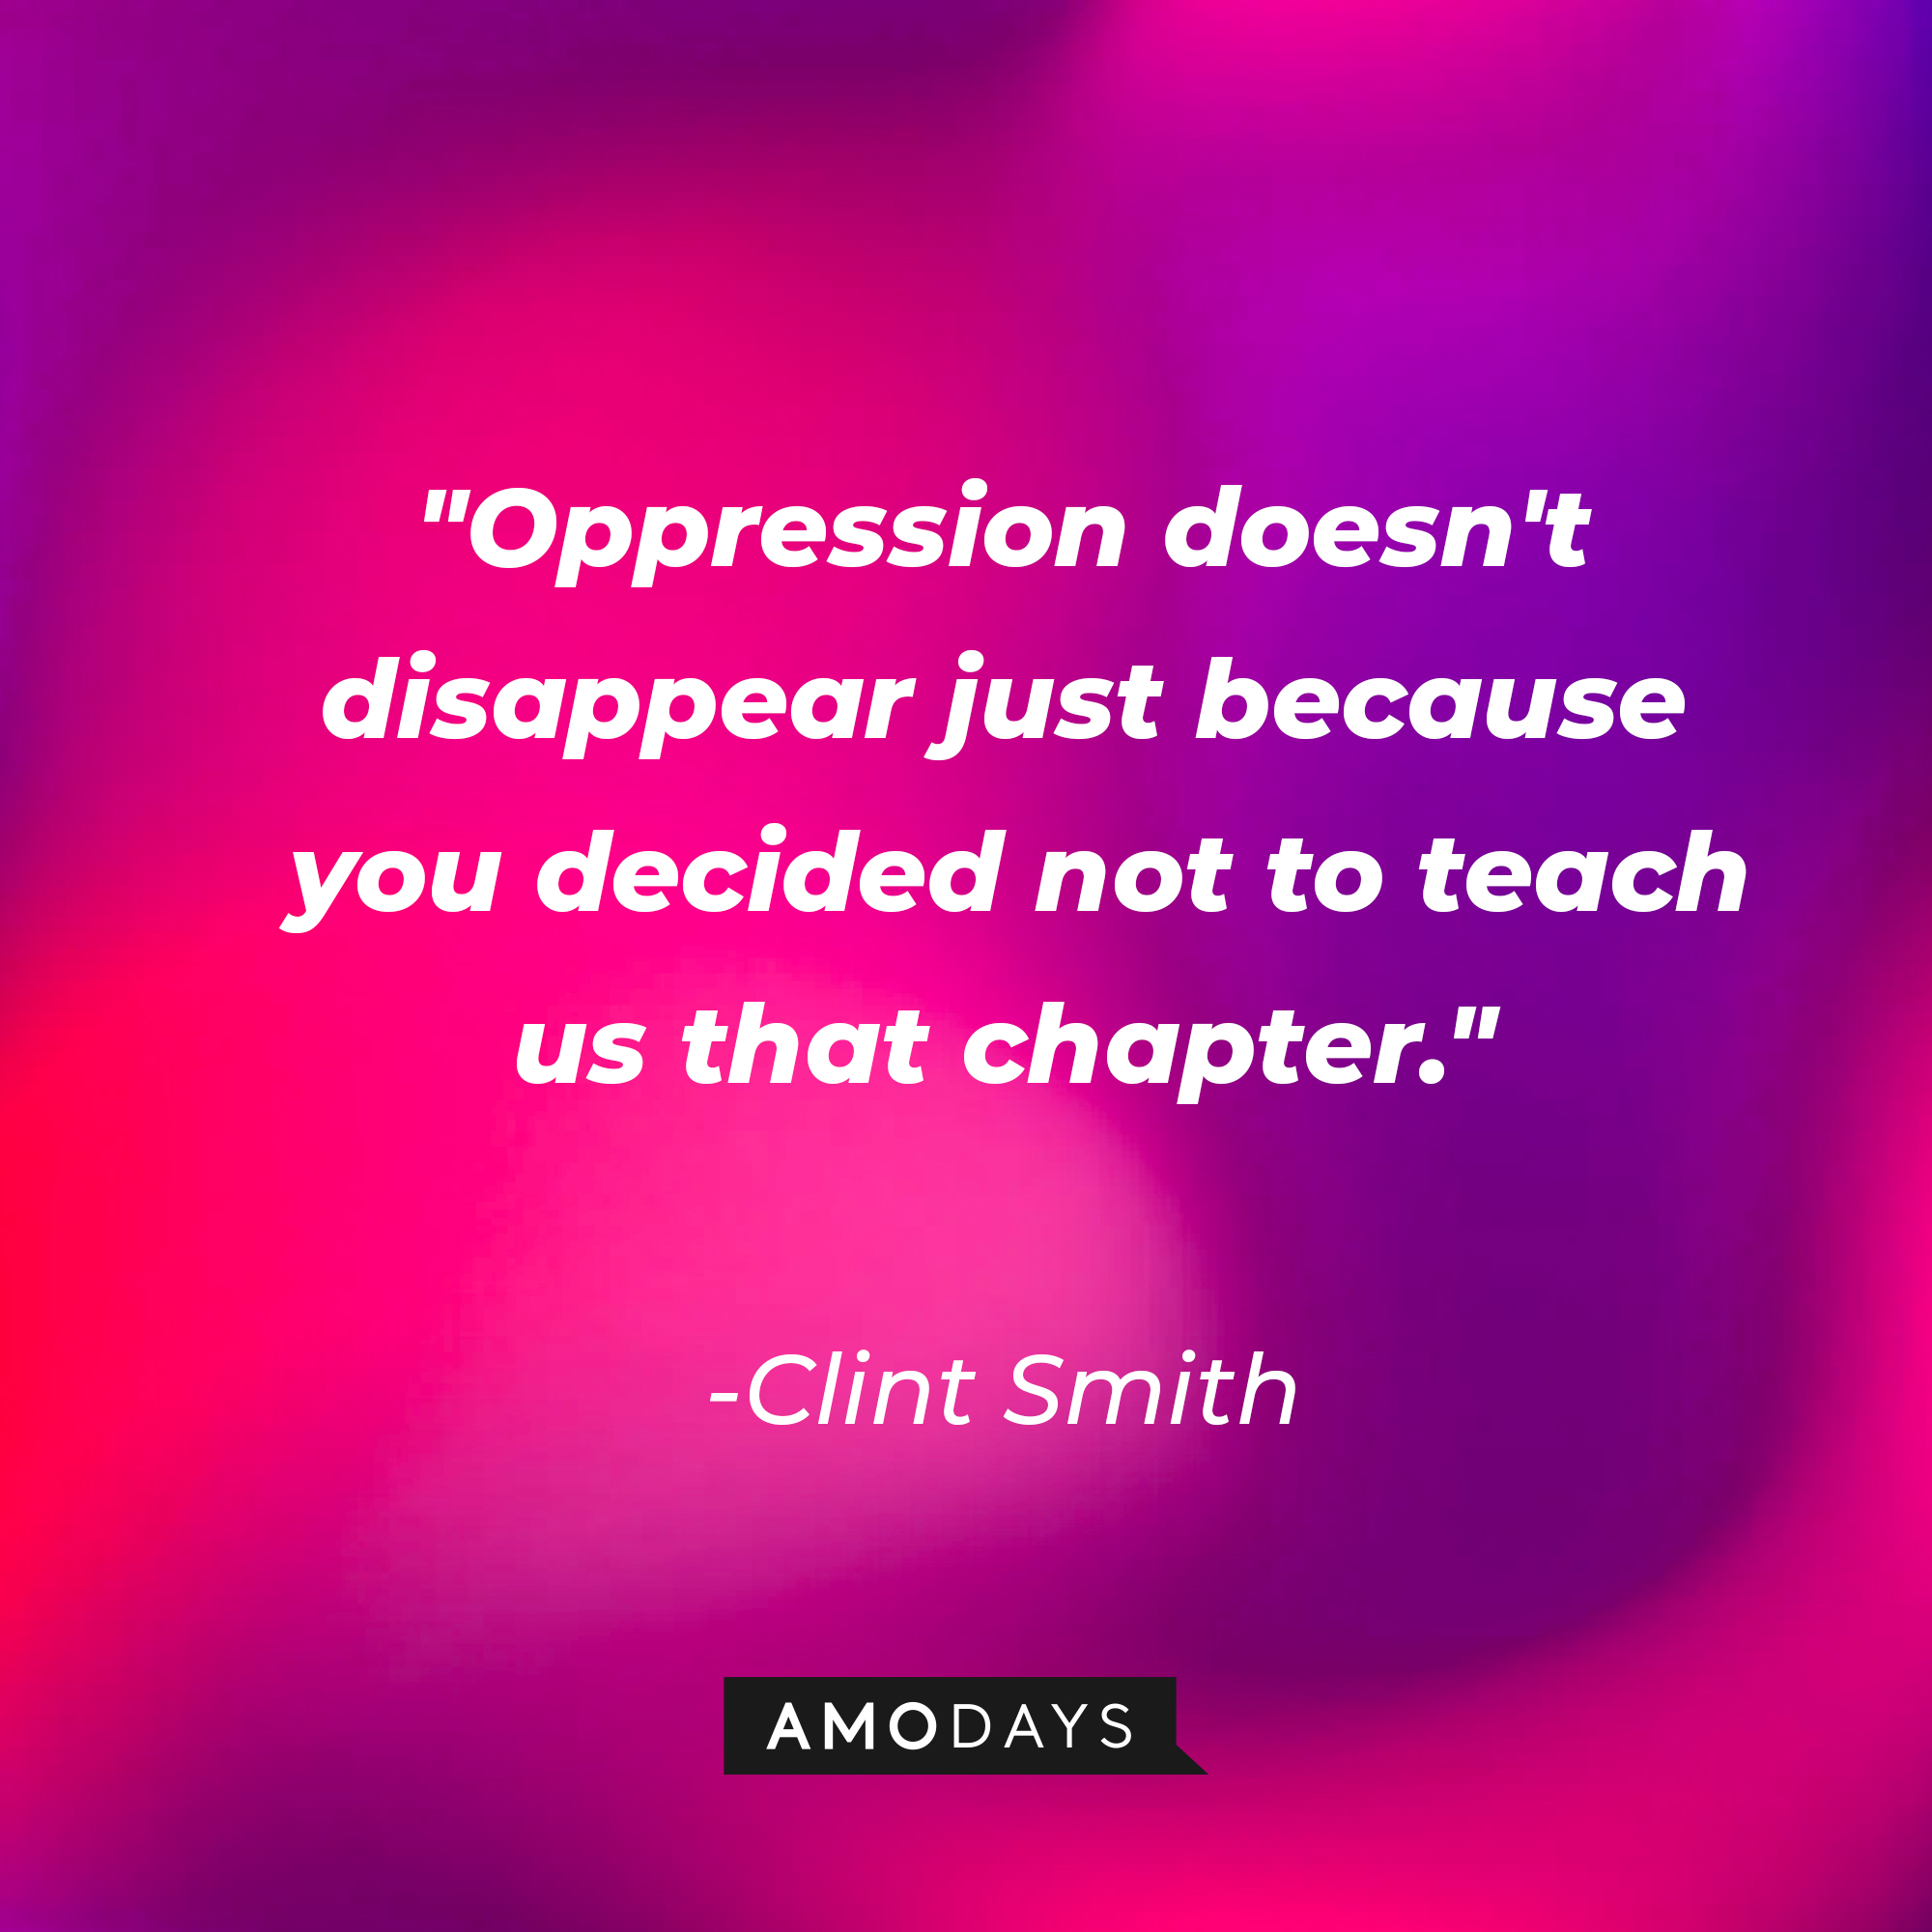 Clint Smith's quote: "Oppression doesn't disappear just because you decided not to teach us that chapter." | Image: AmoDays